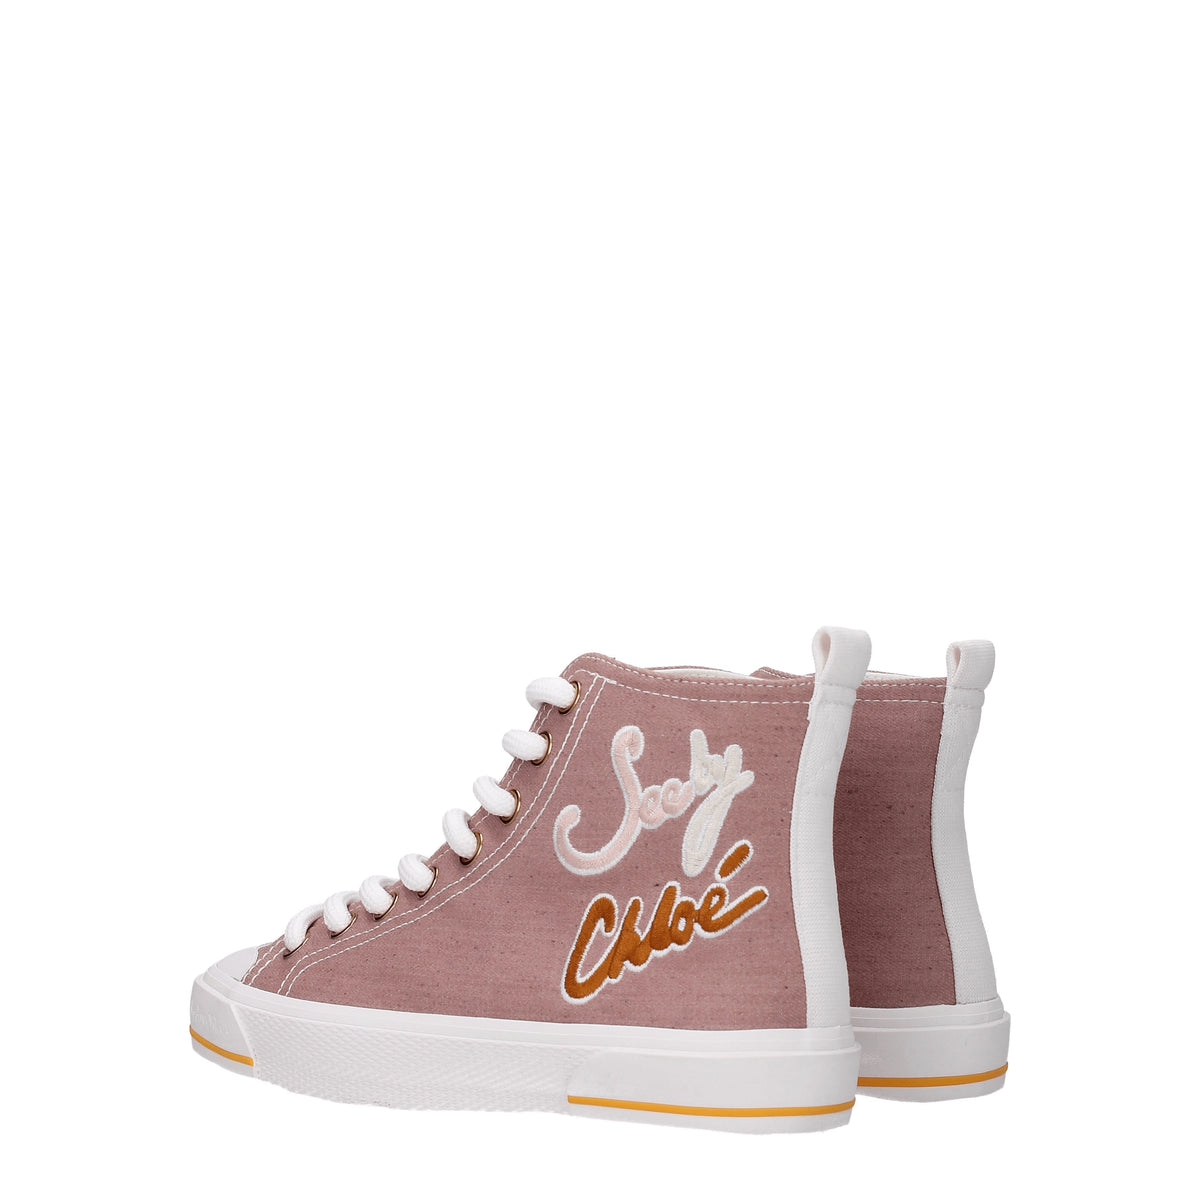 See by Chloé Sneakers Donna Tessuto Rosa Rosa Carne